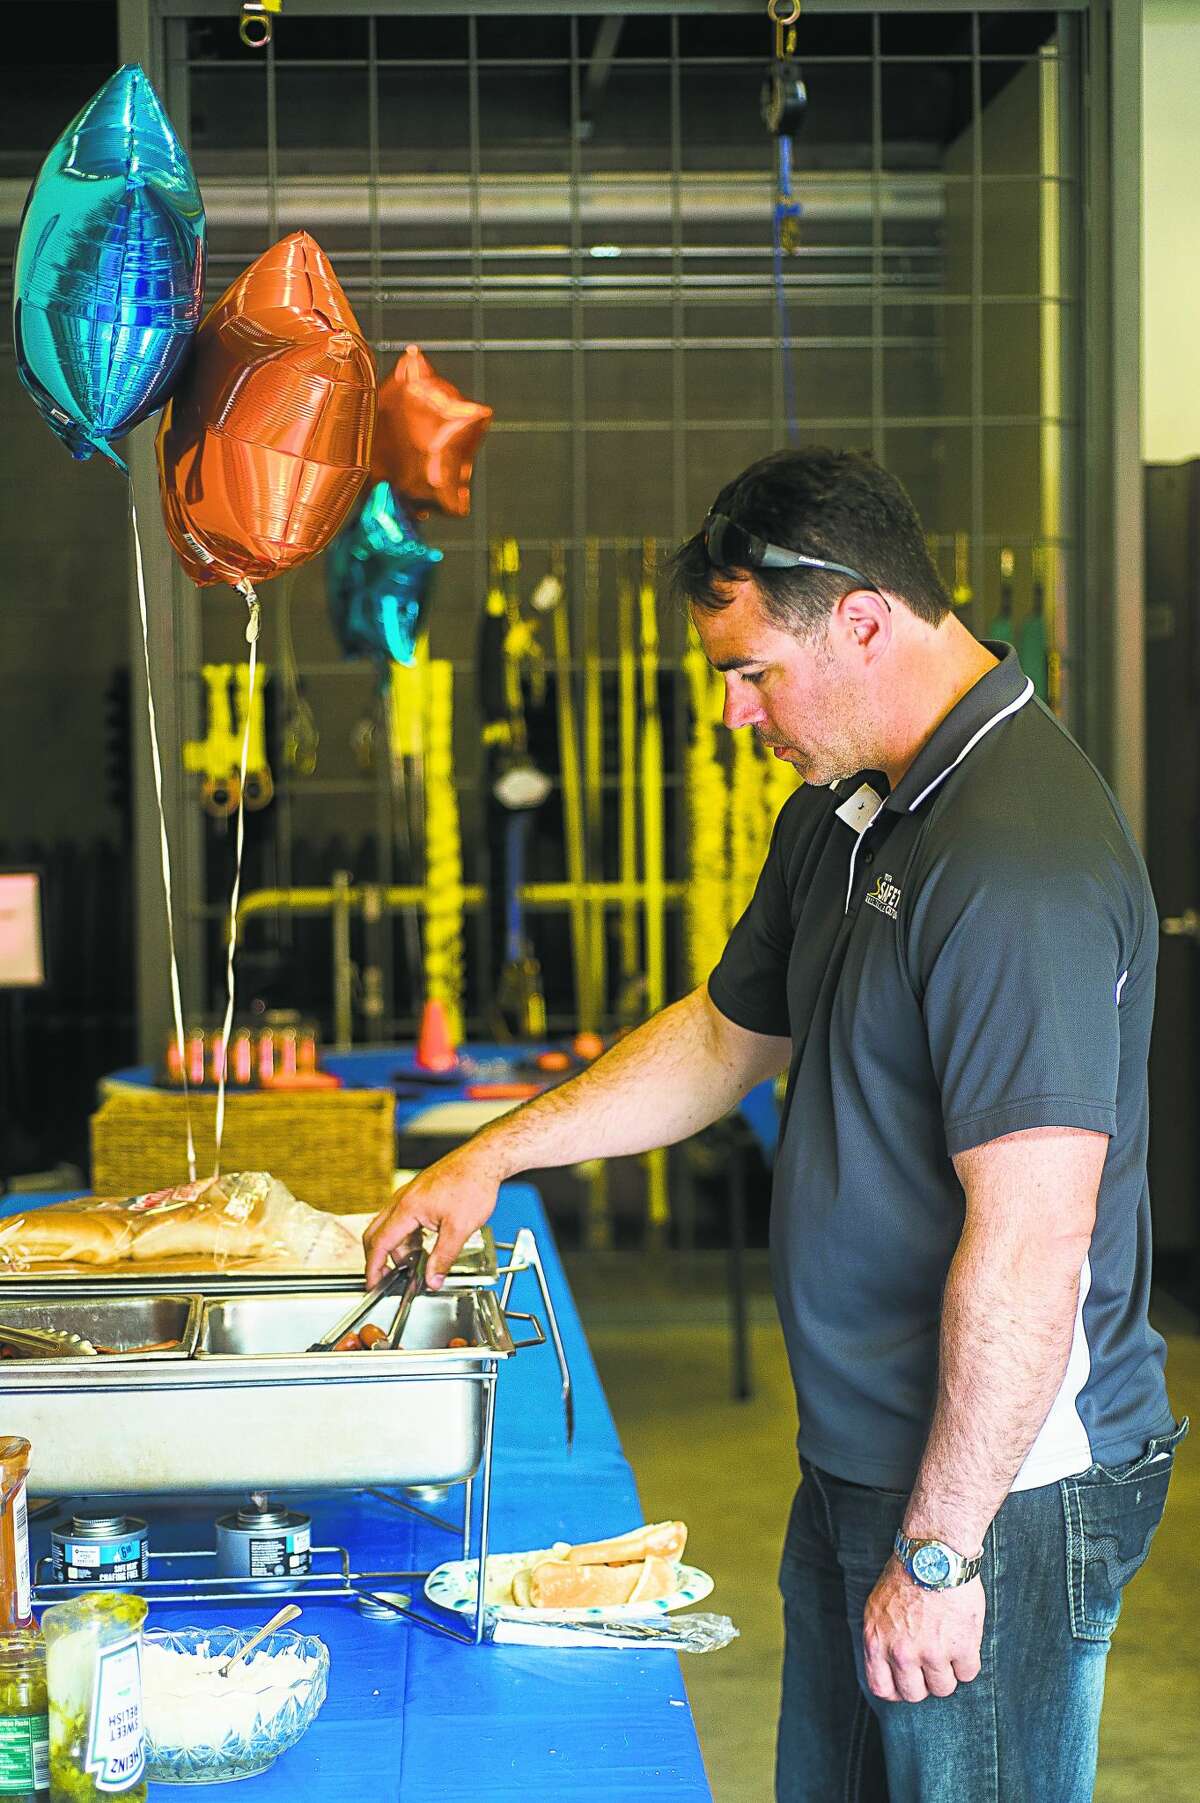 Guests enjoy lunch during a 30th anniversary celebration for the Great Lakes Safety Training Center on Wednesday, June 12, 2019 at the facility in Midland. (Katy Kildee/kkildee@mdn.net)